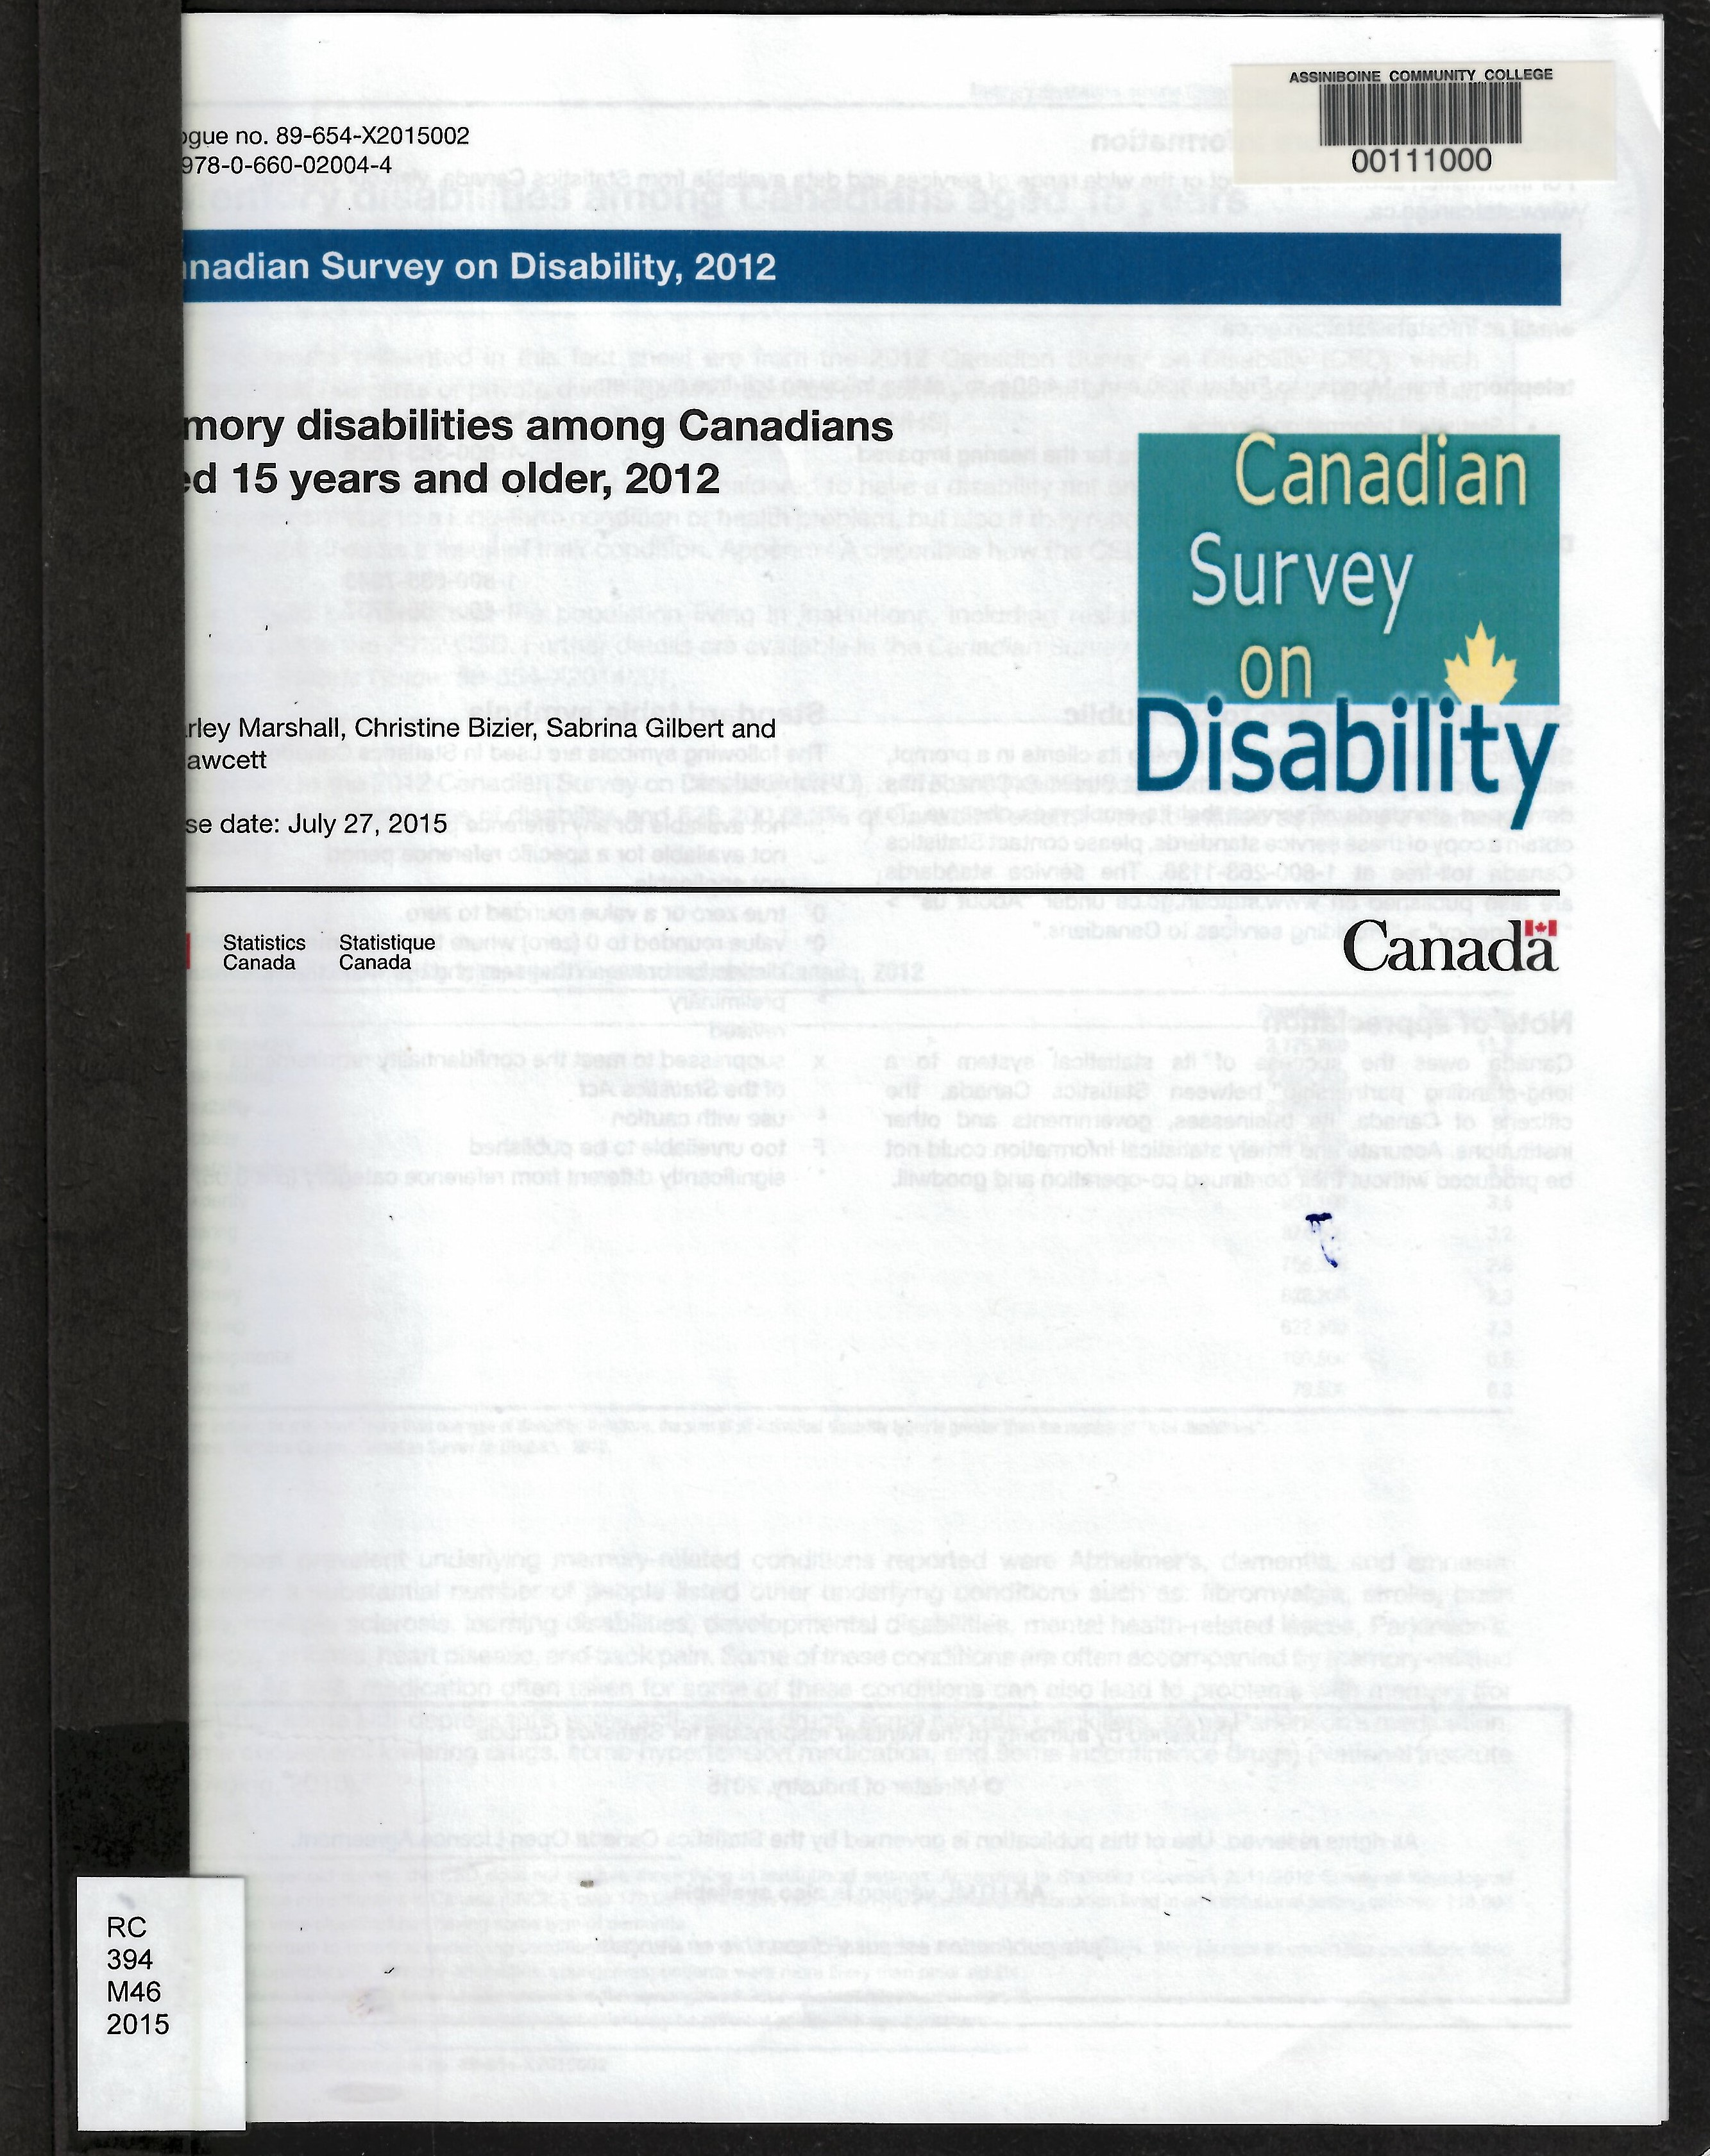 Memory disabilities among Canadians aged 15 years and older, 2012